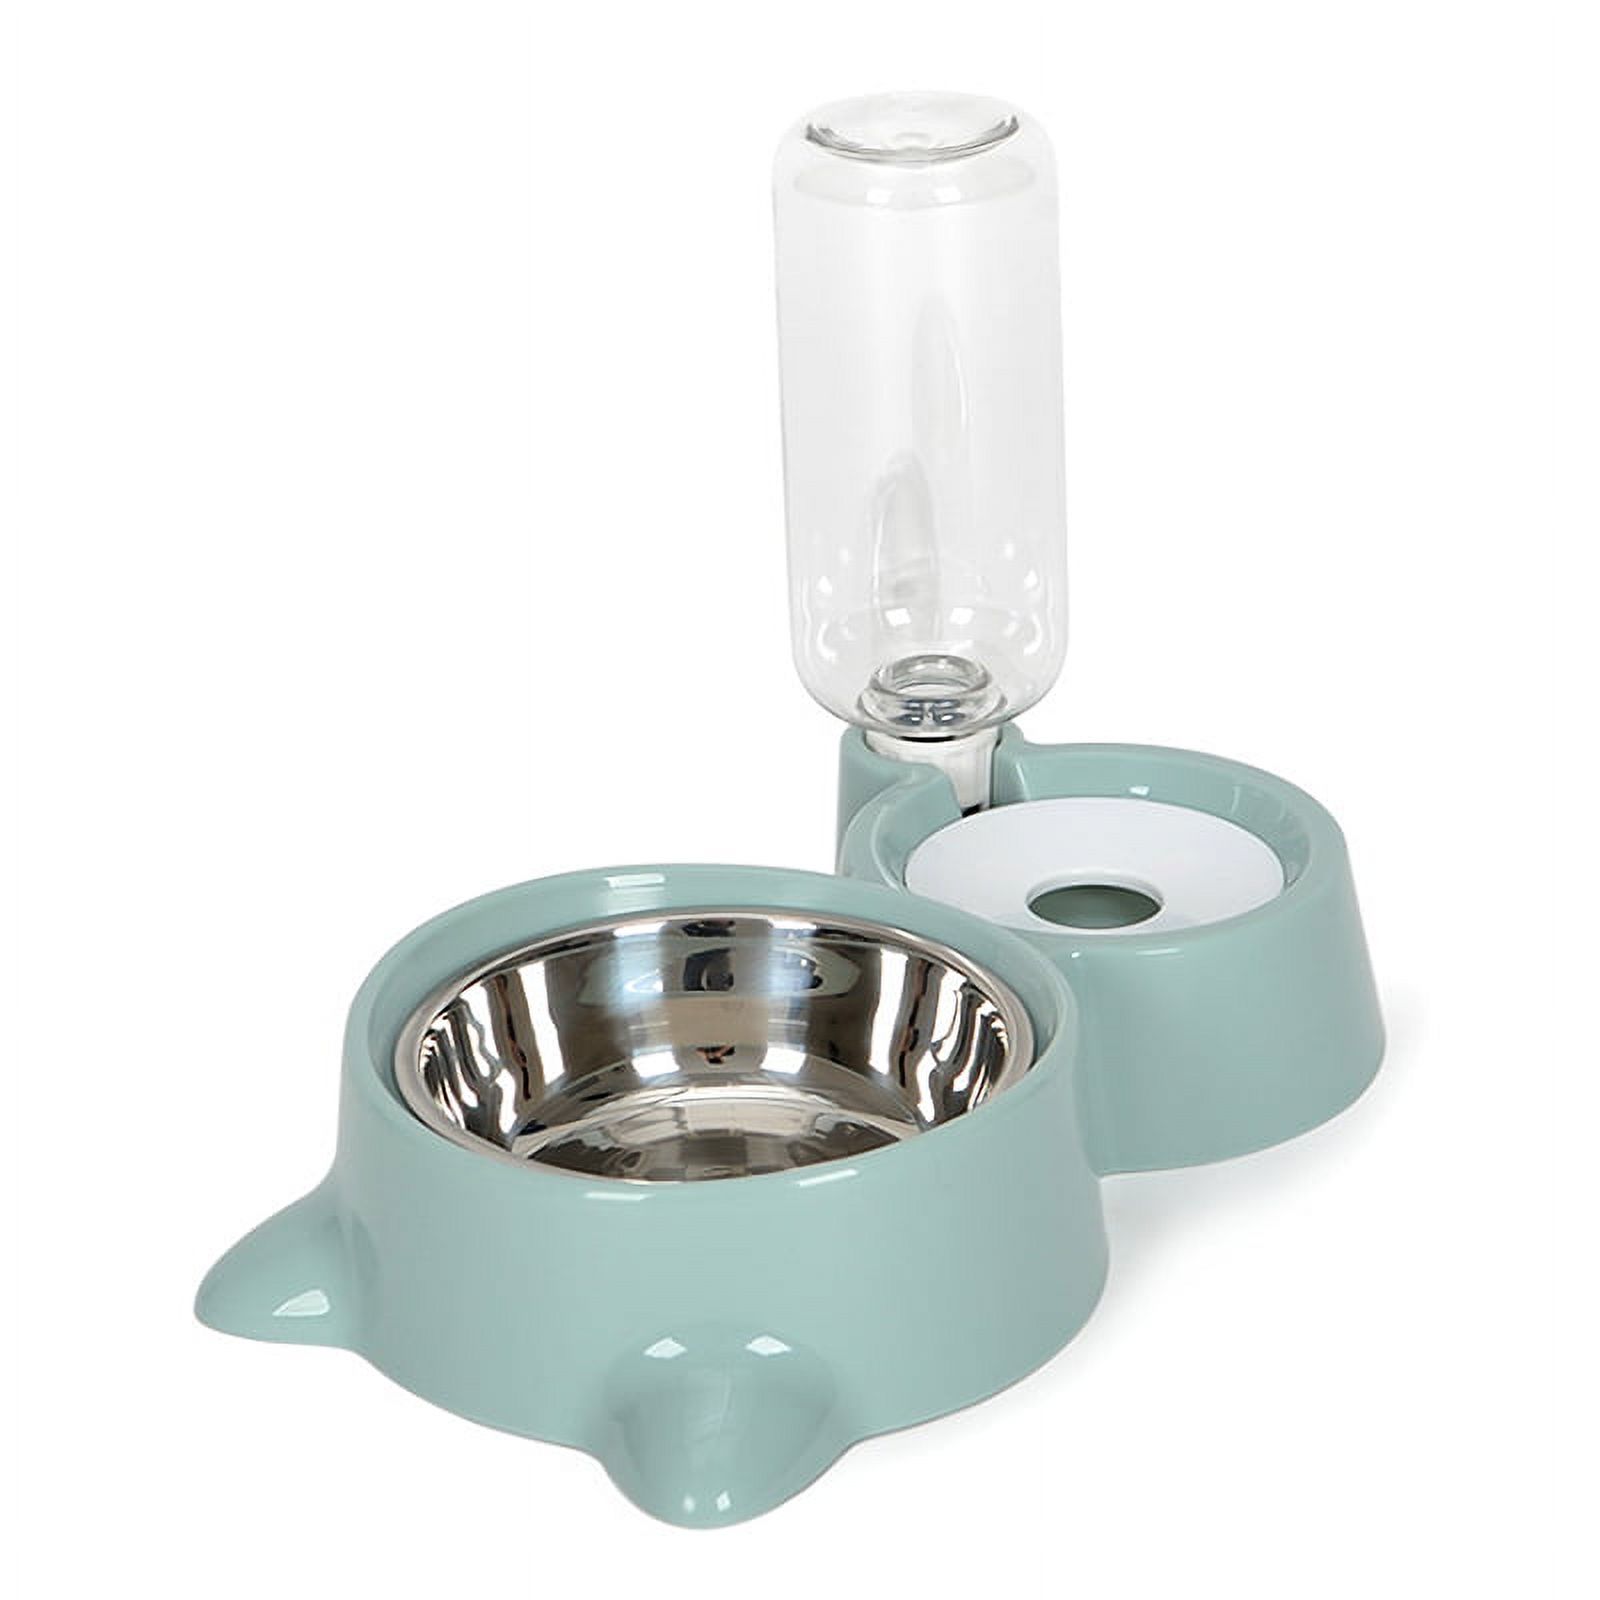 Automatic Pet Feeder Water Dispenser Cat Dog Drinking Bowl Dogs Feeder Dish Double Bowl;Automatic Pet Feeder Water Dispenser Cat Dog Drinking Bowl Dogs Feeder Dish - image 1 of 8